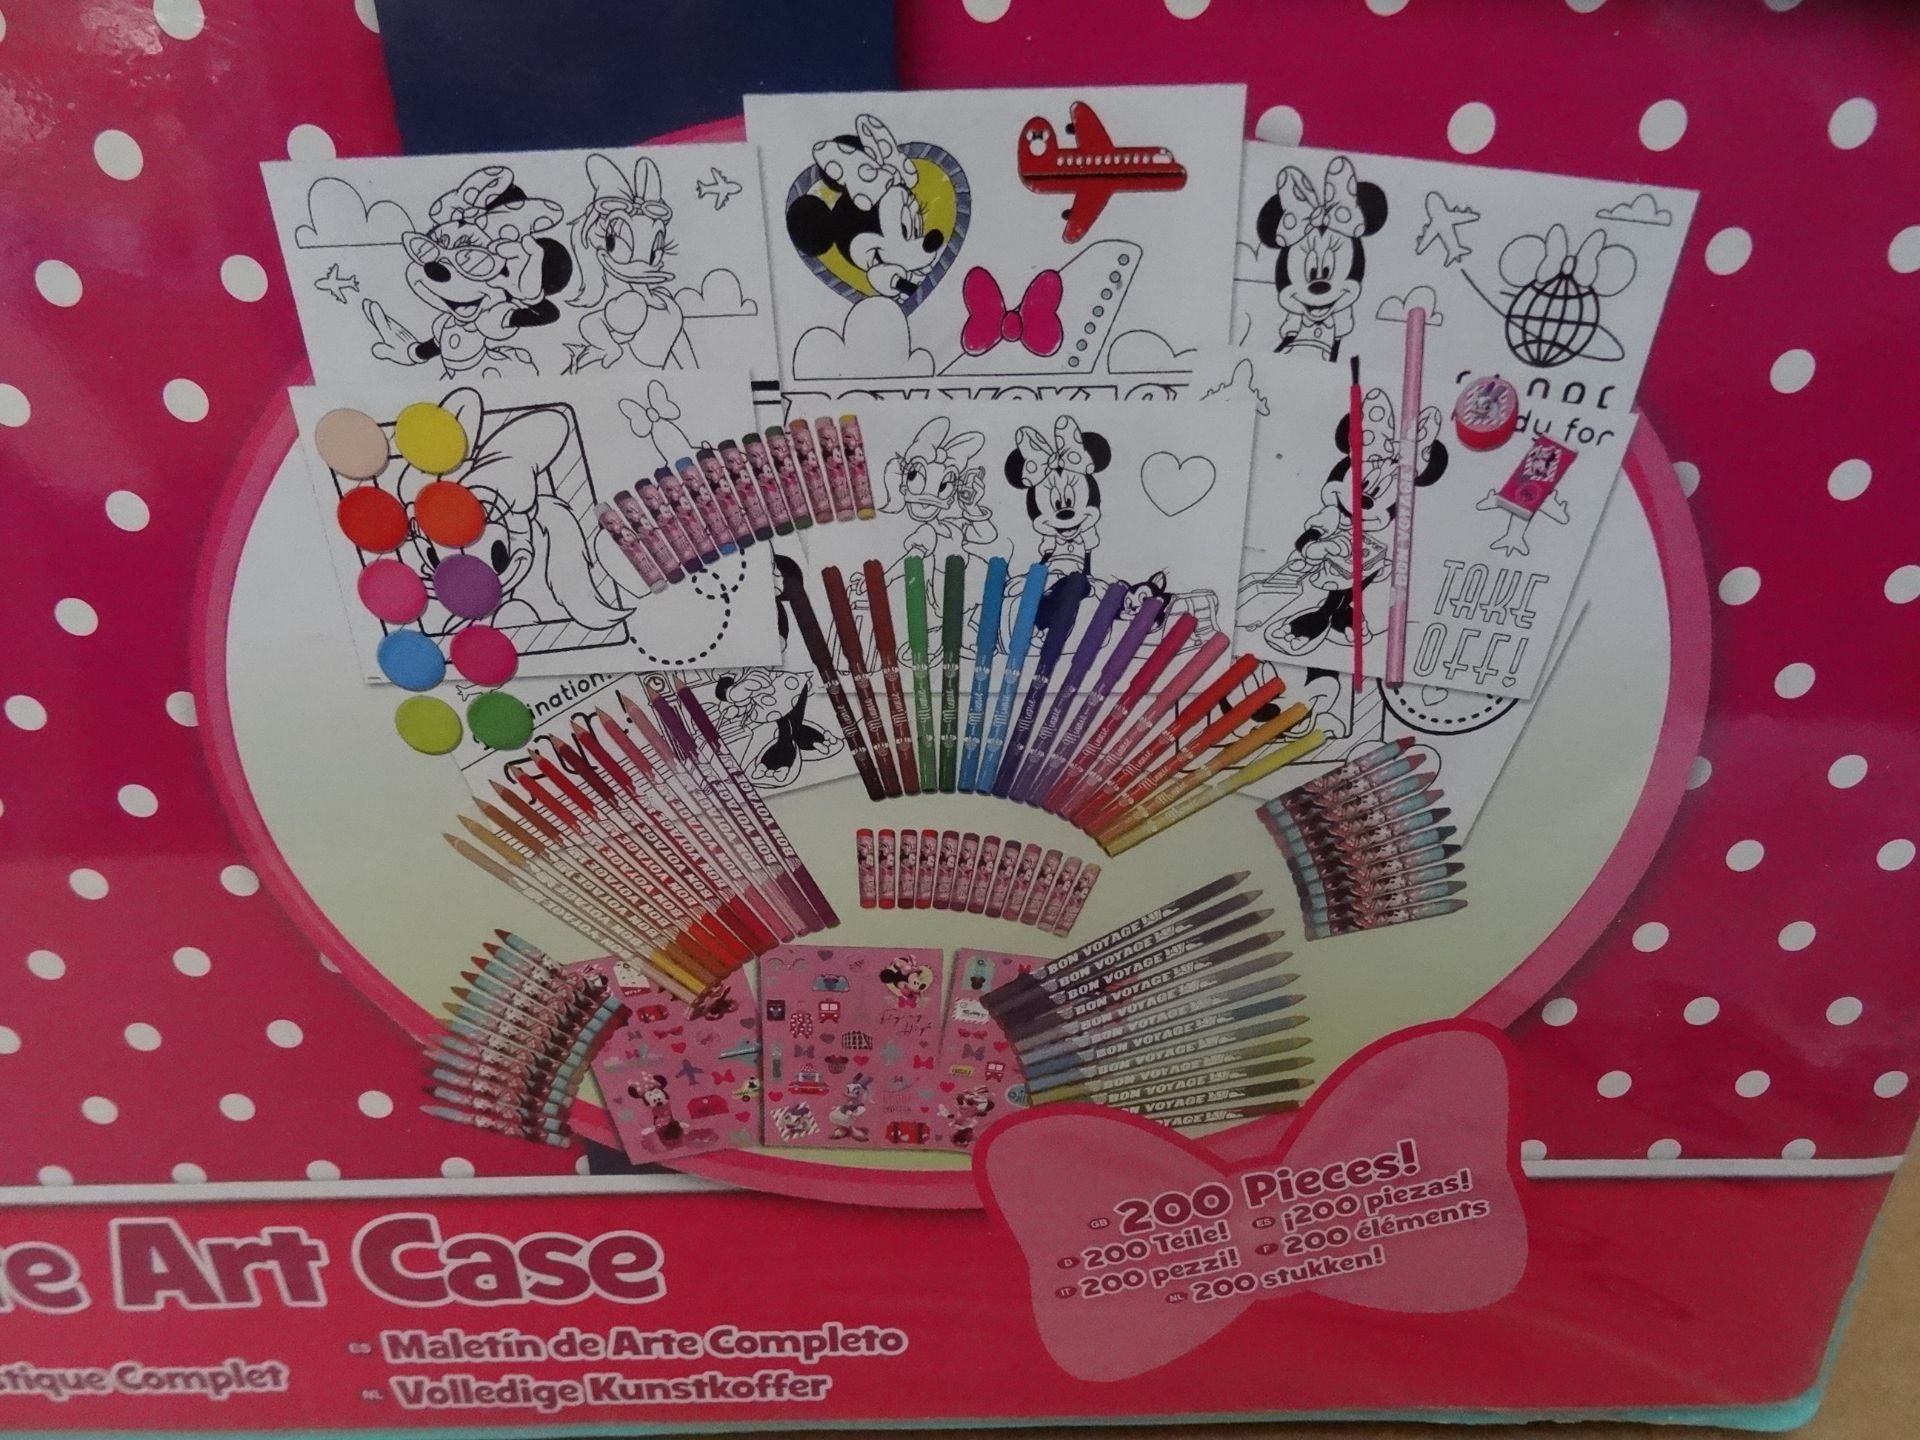 12 x Disney Minnie Mouse 200 Piece Mega Extra Large Complete Art Cases! Each Includes: 24 Crayons, - Image 3 of 3